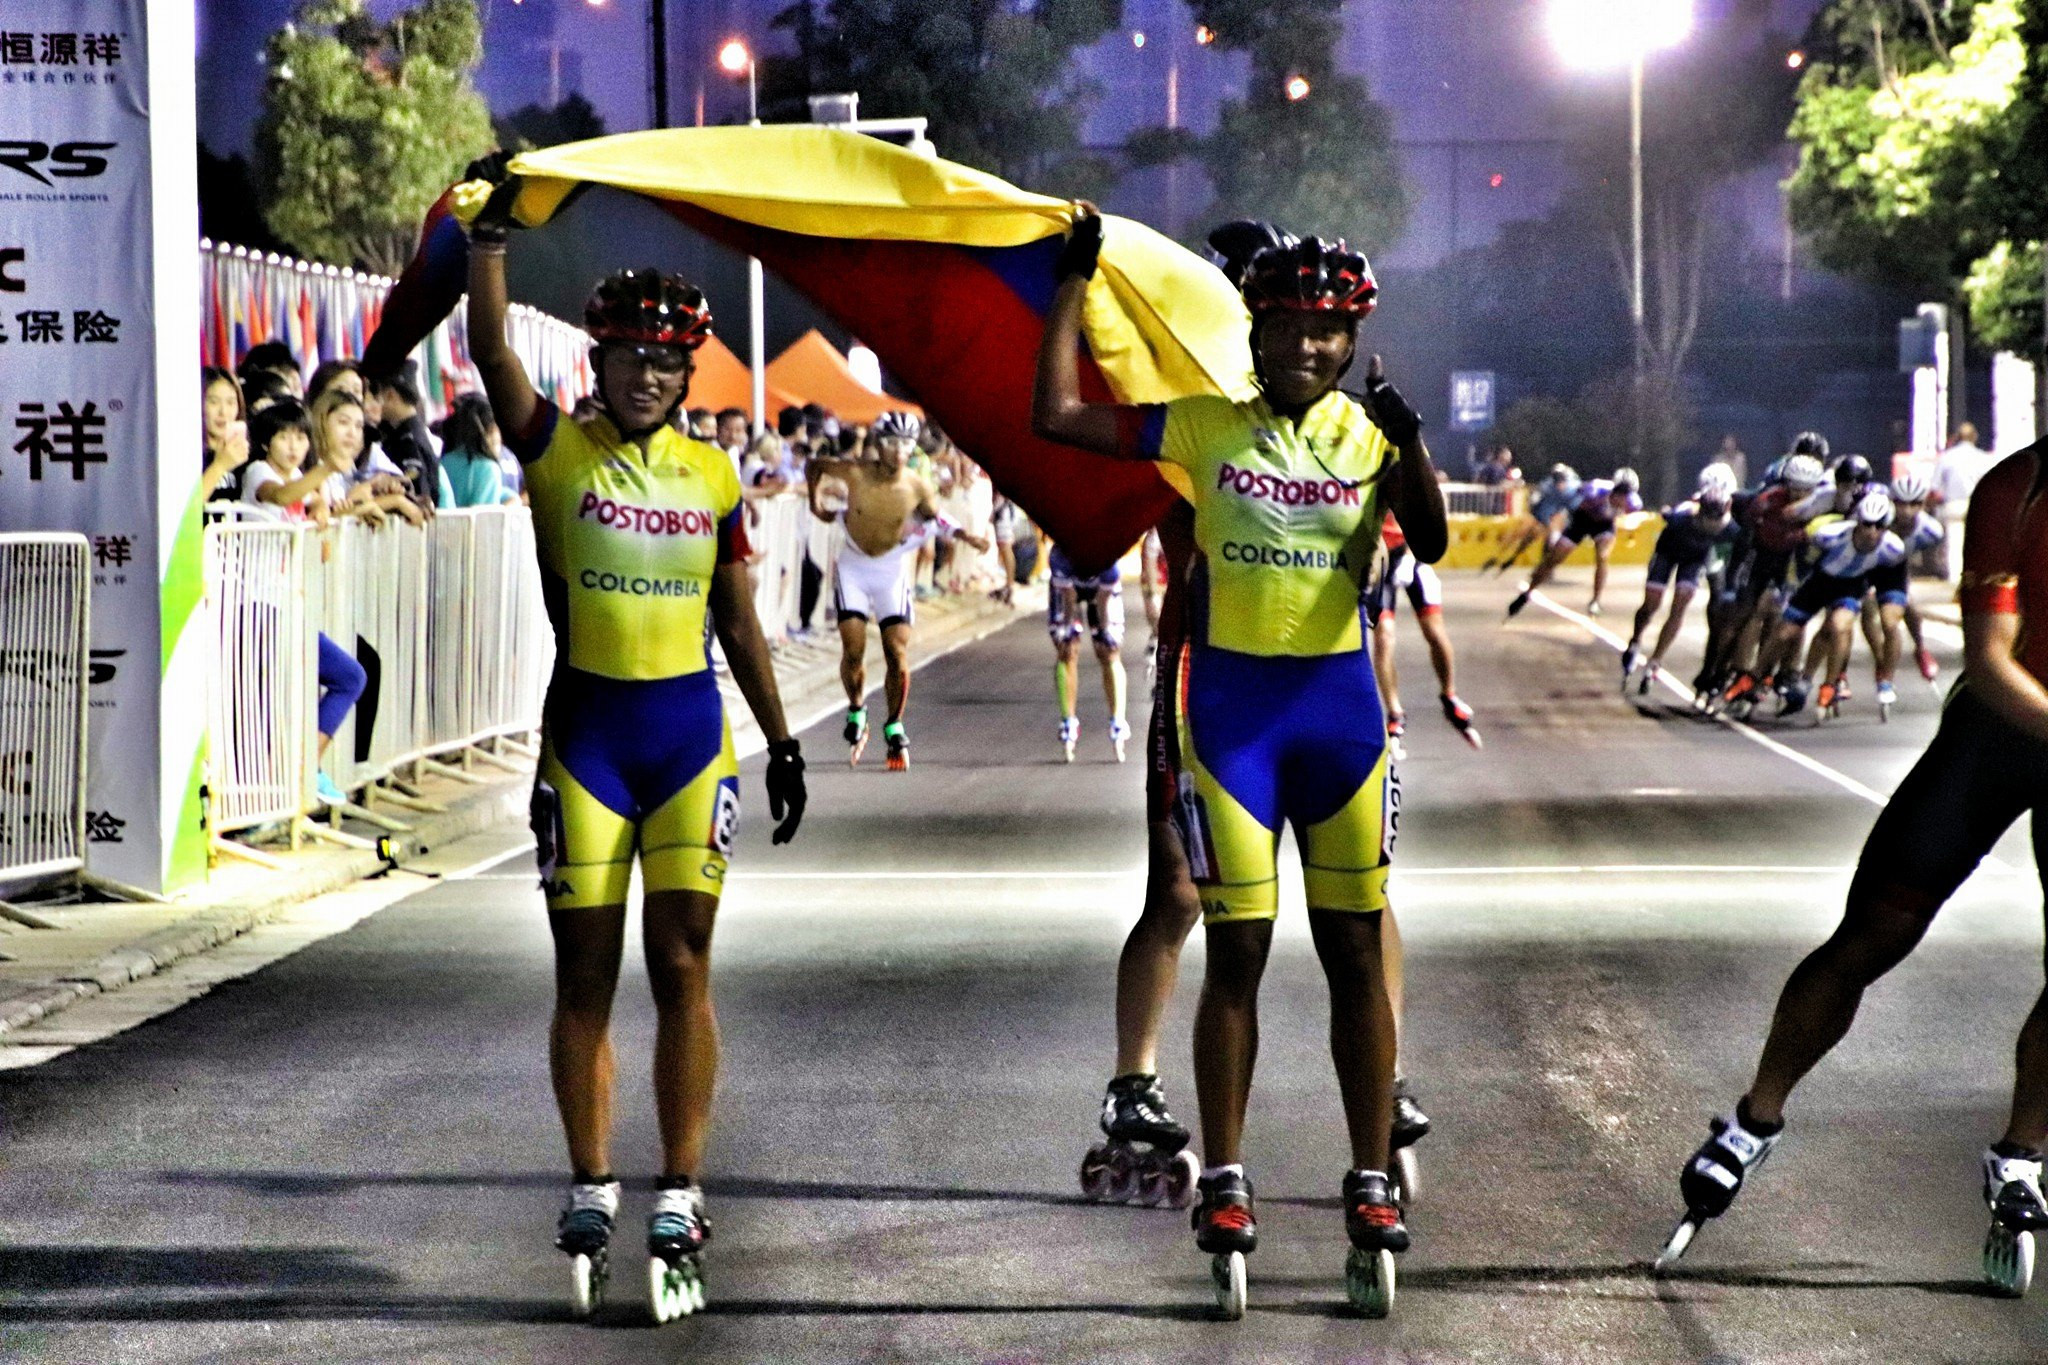 Colombia earn double speed skating gold at World Roller Games